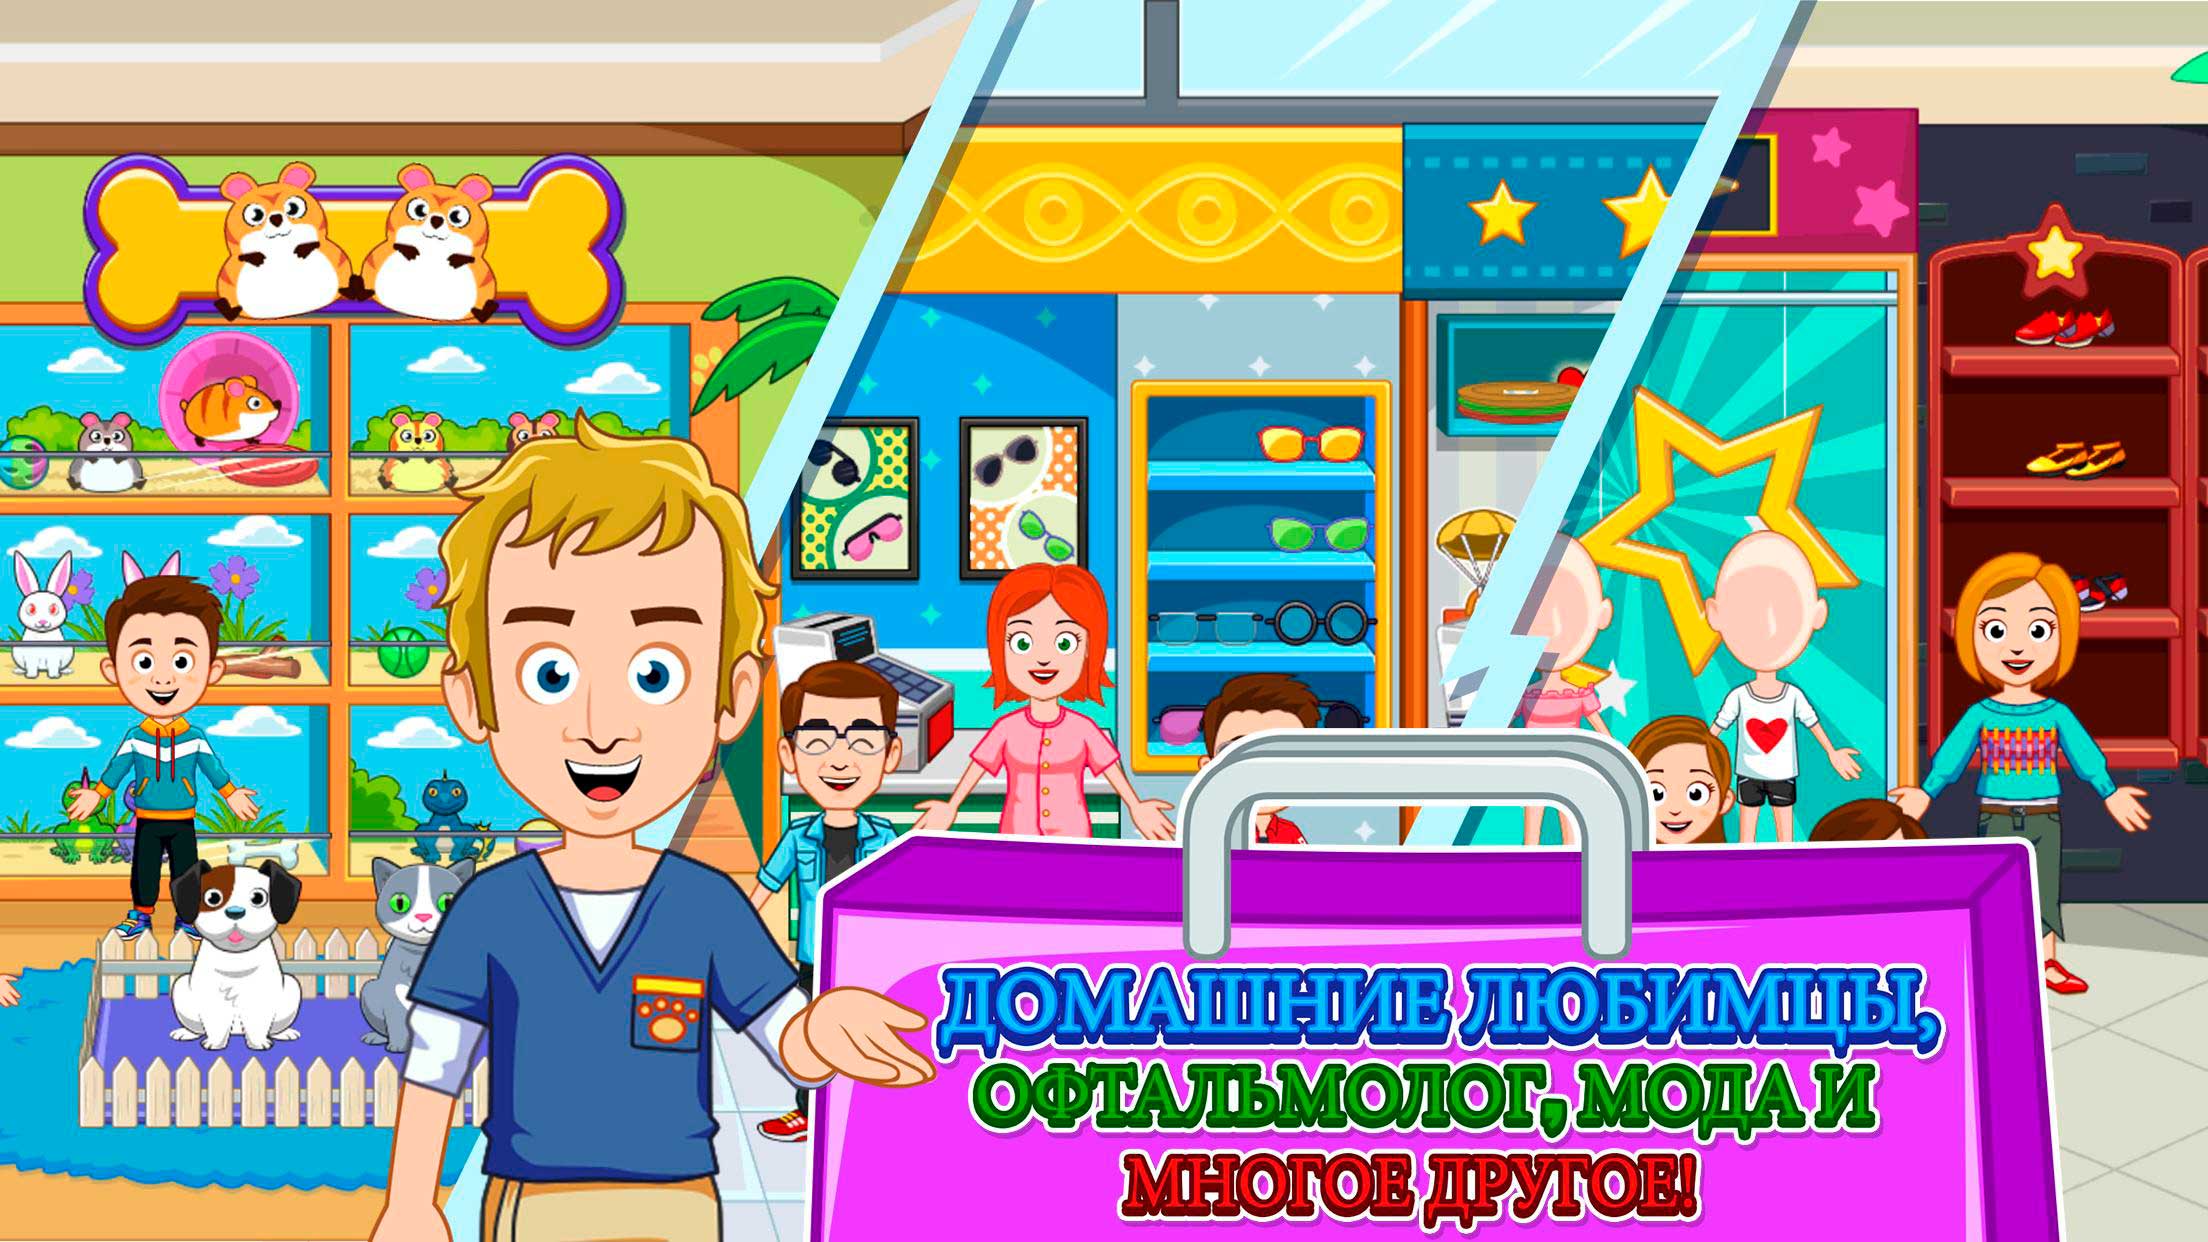 My town shop. Игра my Town. My Town торговый Пассаж. Игра my Town торговый центр. Игра my Town Play discover.